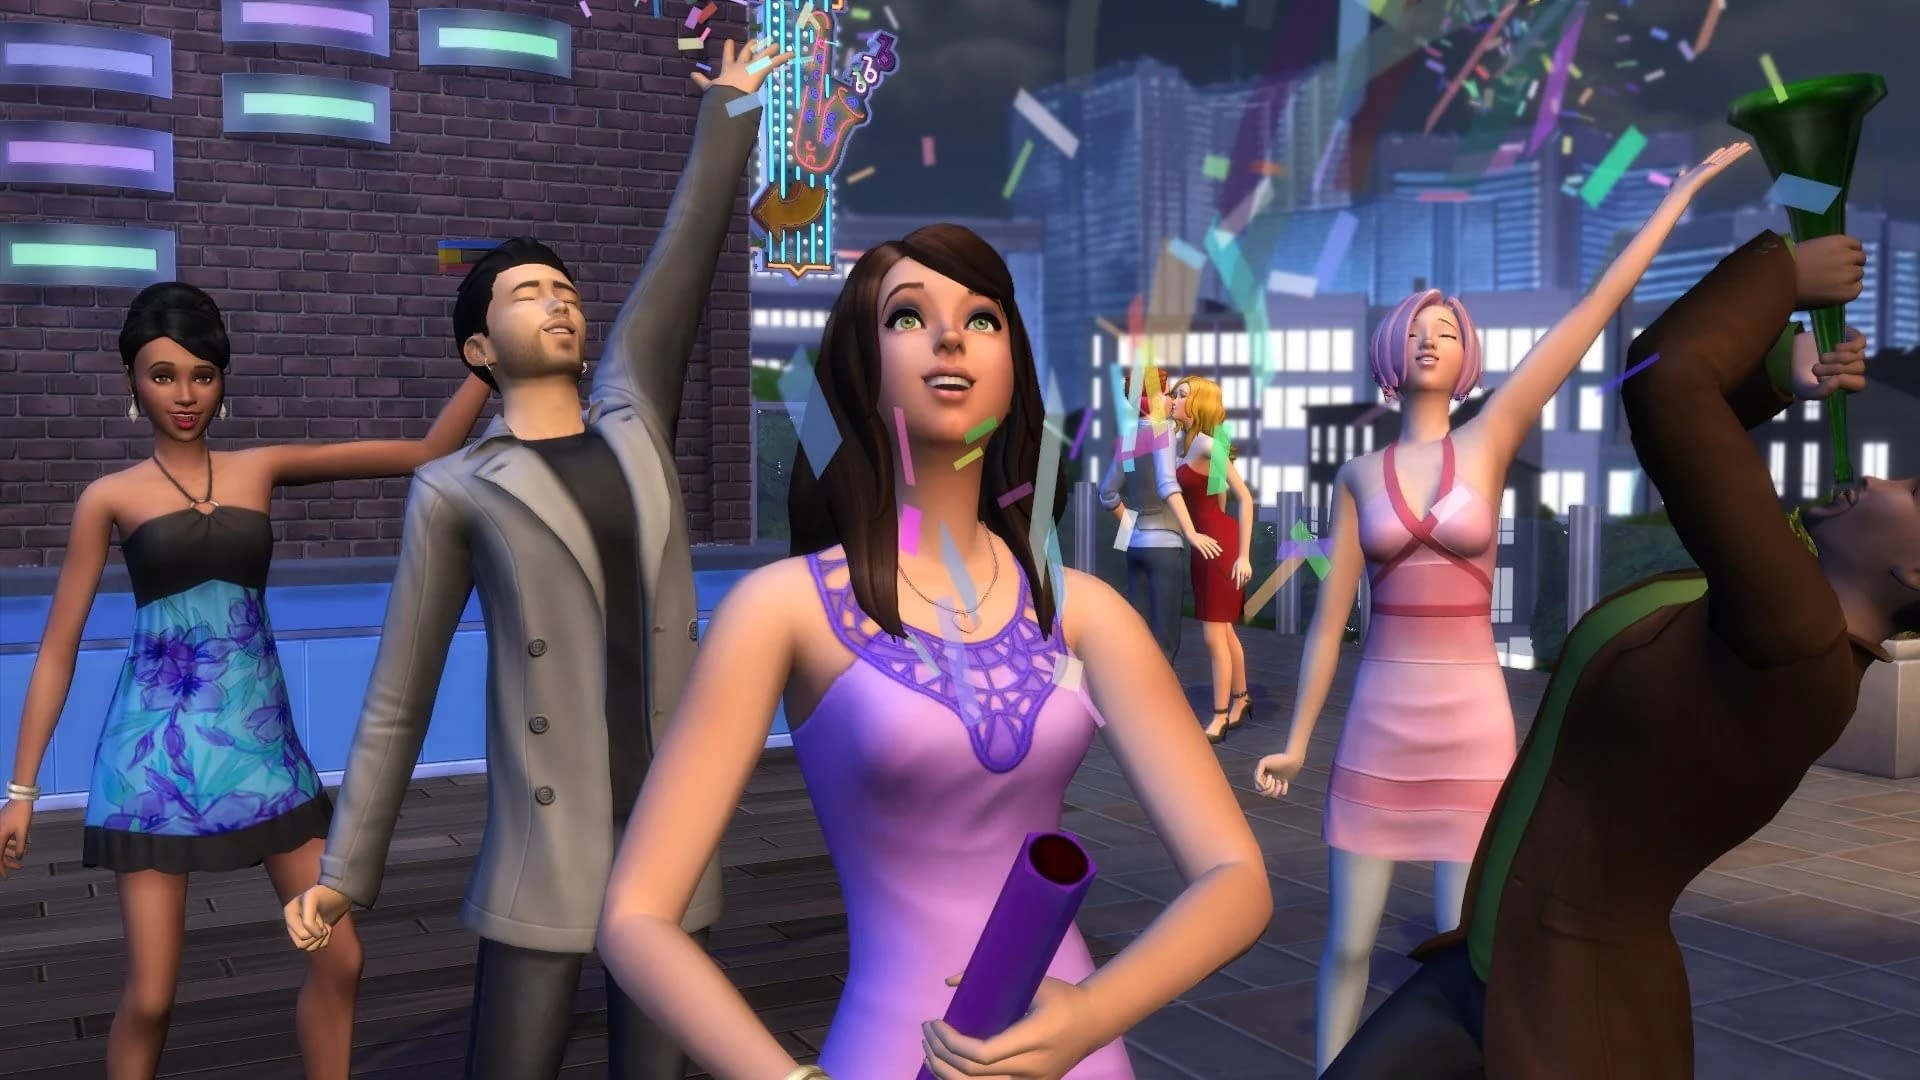 EA announced that The Sims 4 has more than 70 million players